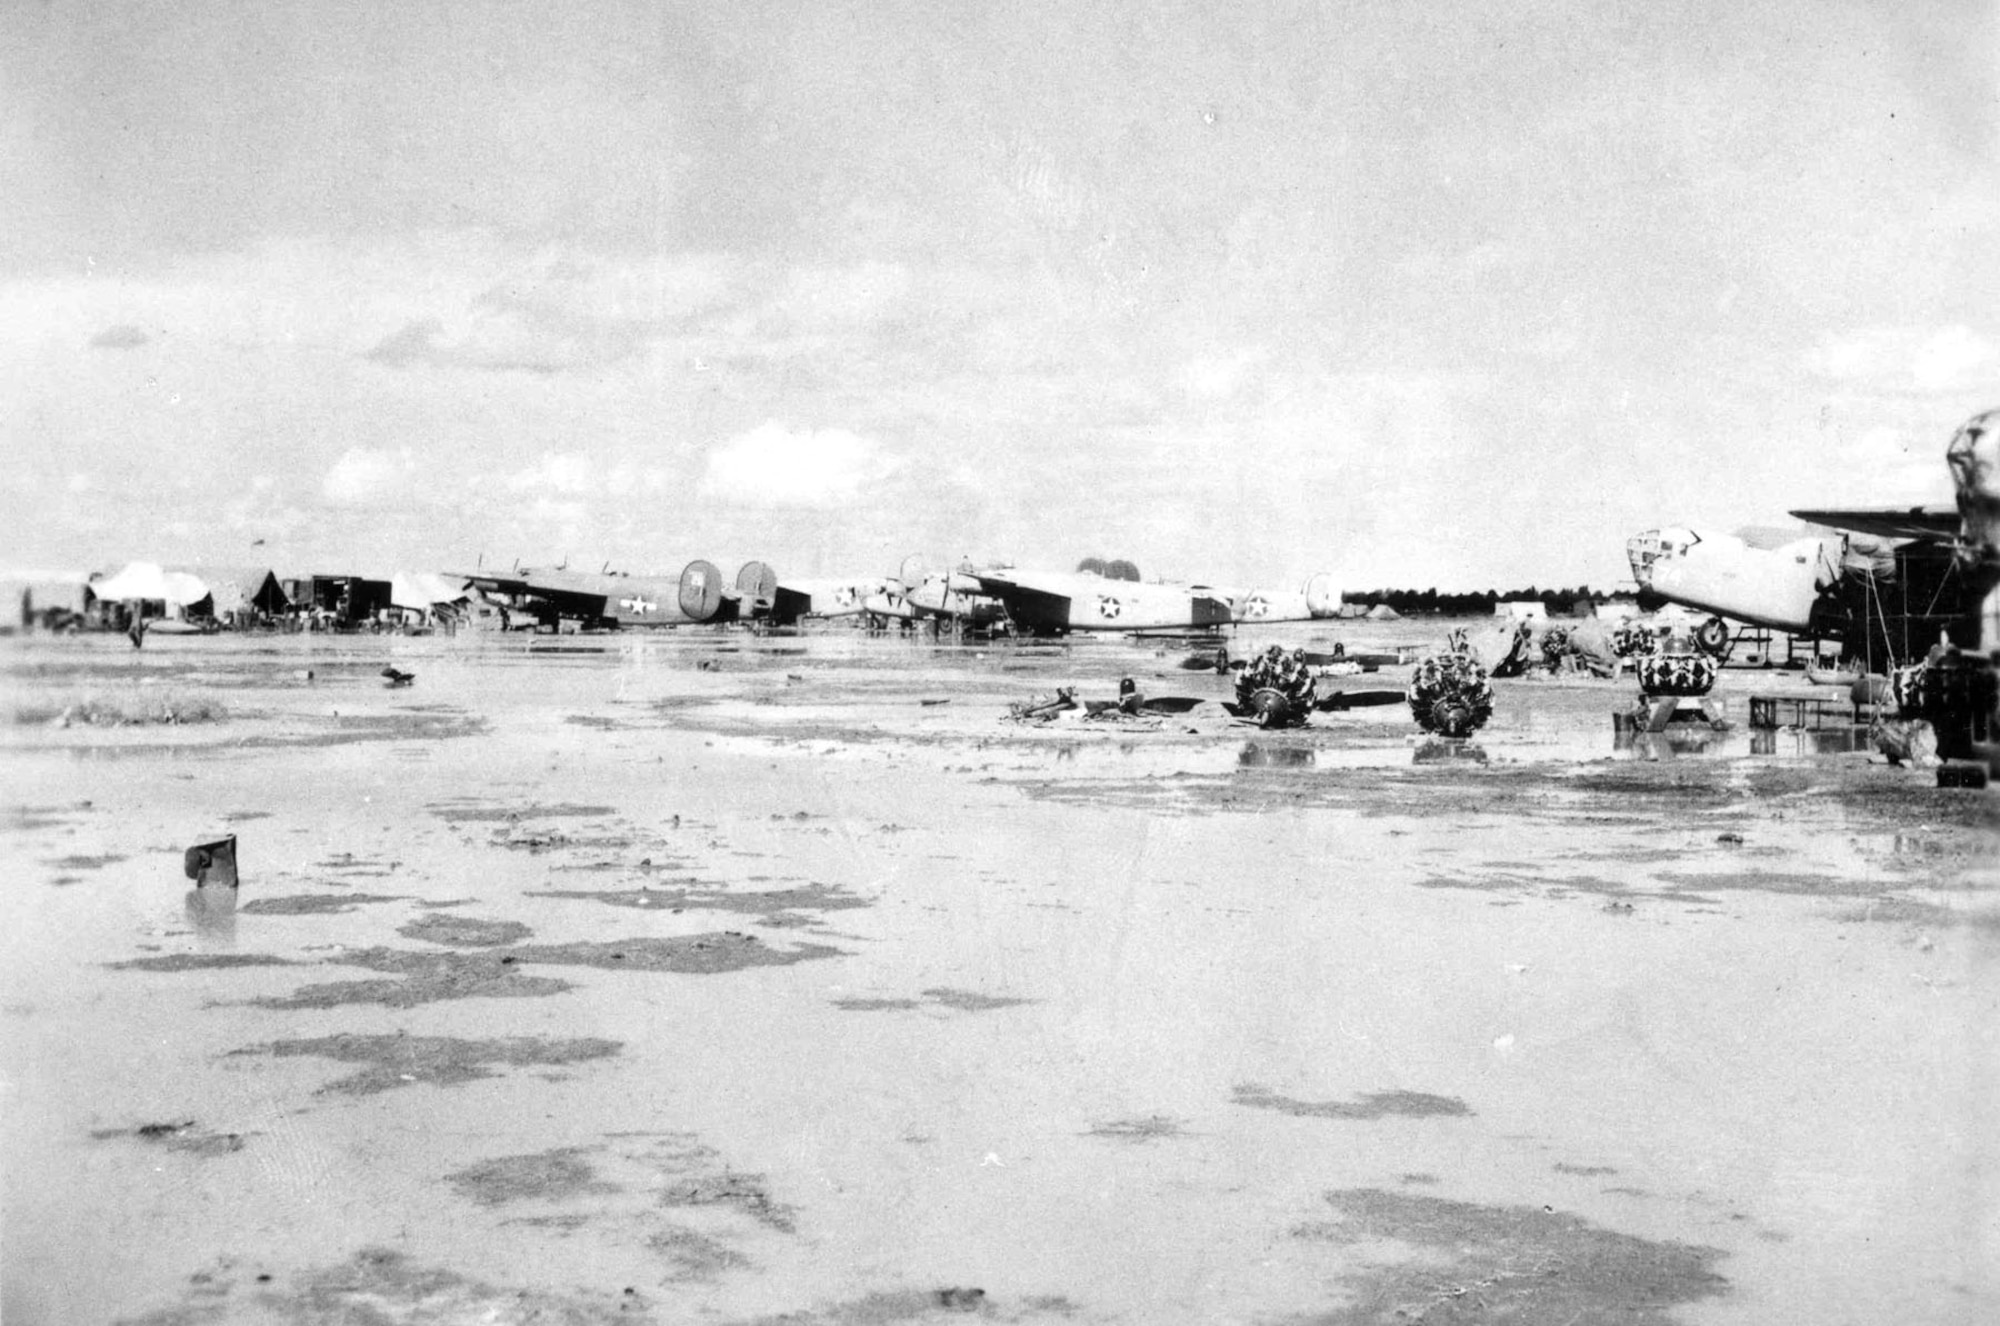 58th Service Squadron depot. Note the standing water and the engines laying on the ground. The Consolidated B-24D "Strawberry Bitch" is in the center of the photo (with vertical stabilizers removed). (U.S. Air Force photo)